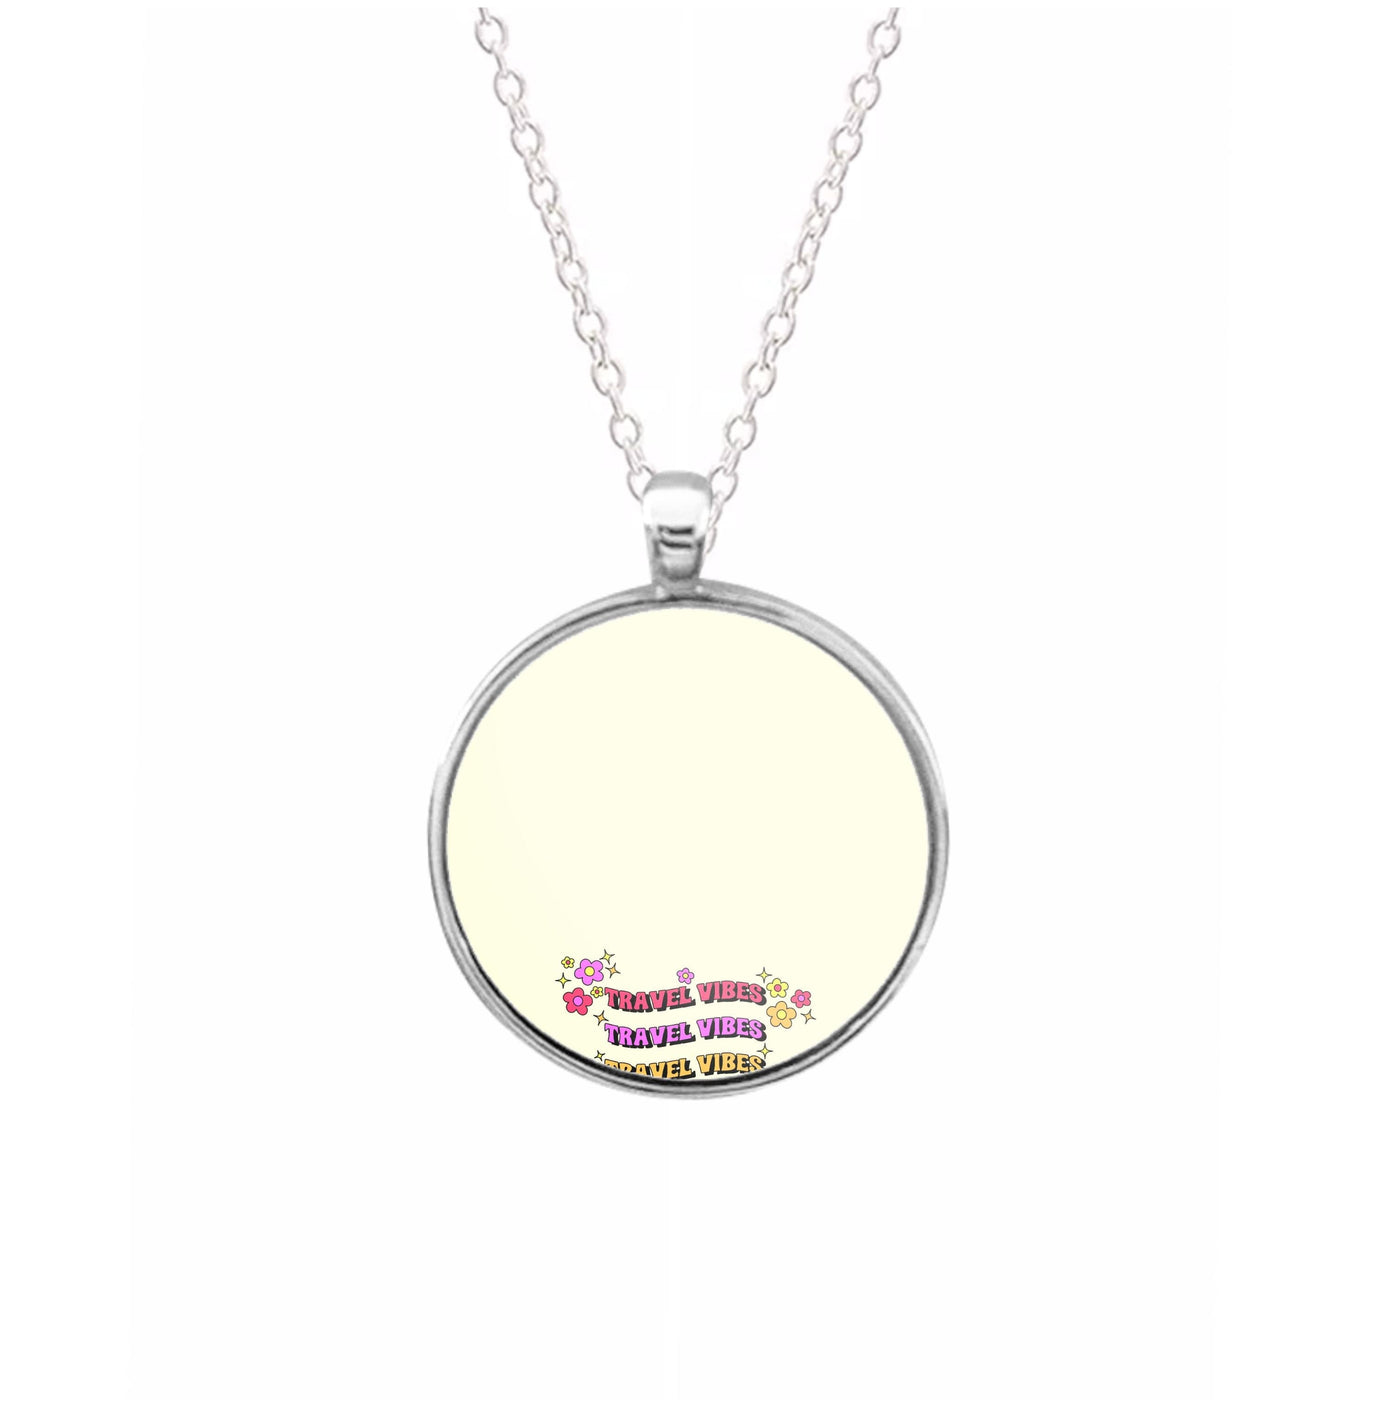 Travel Vibes - Travel Necklace